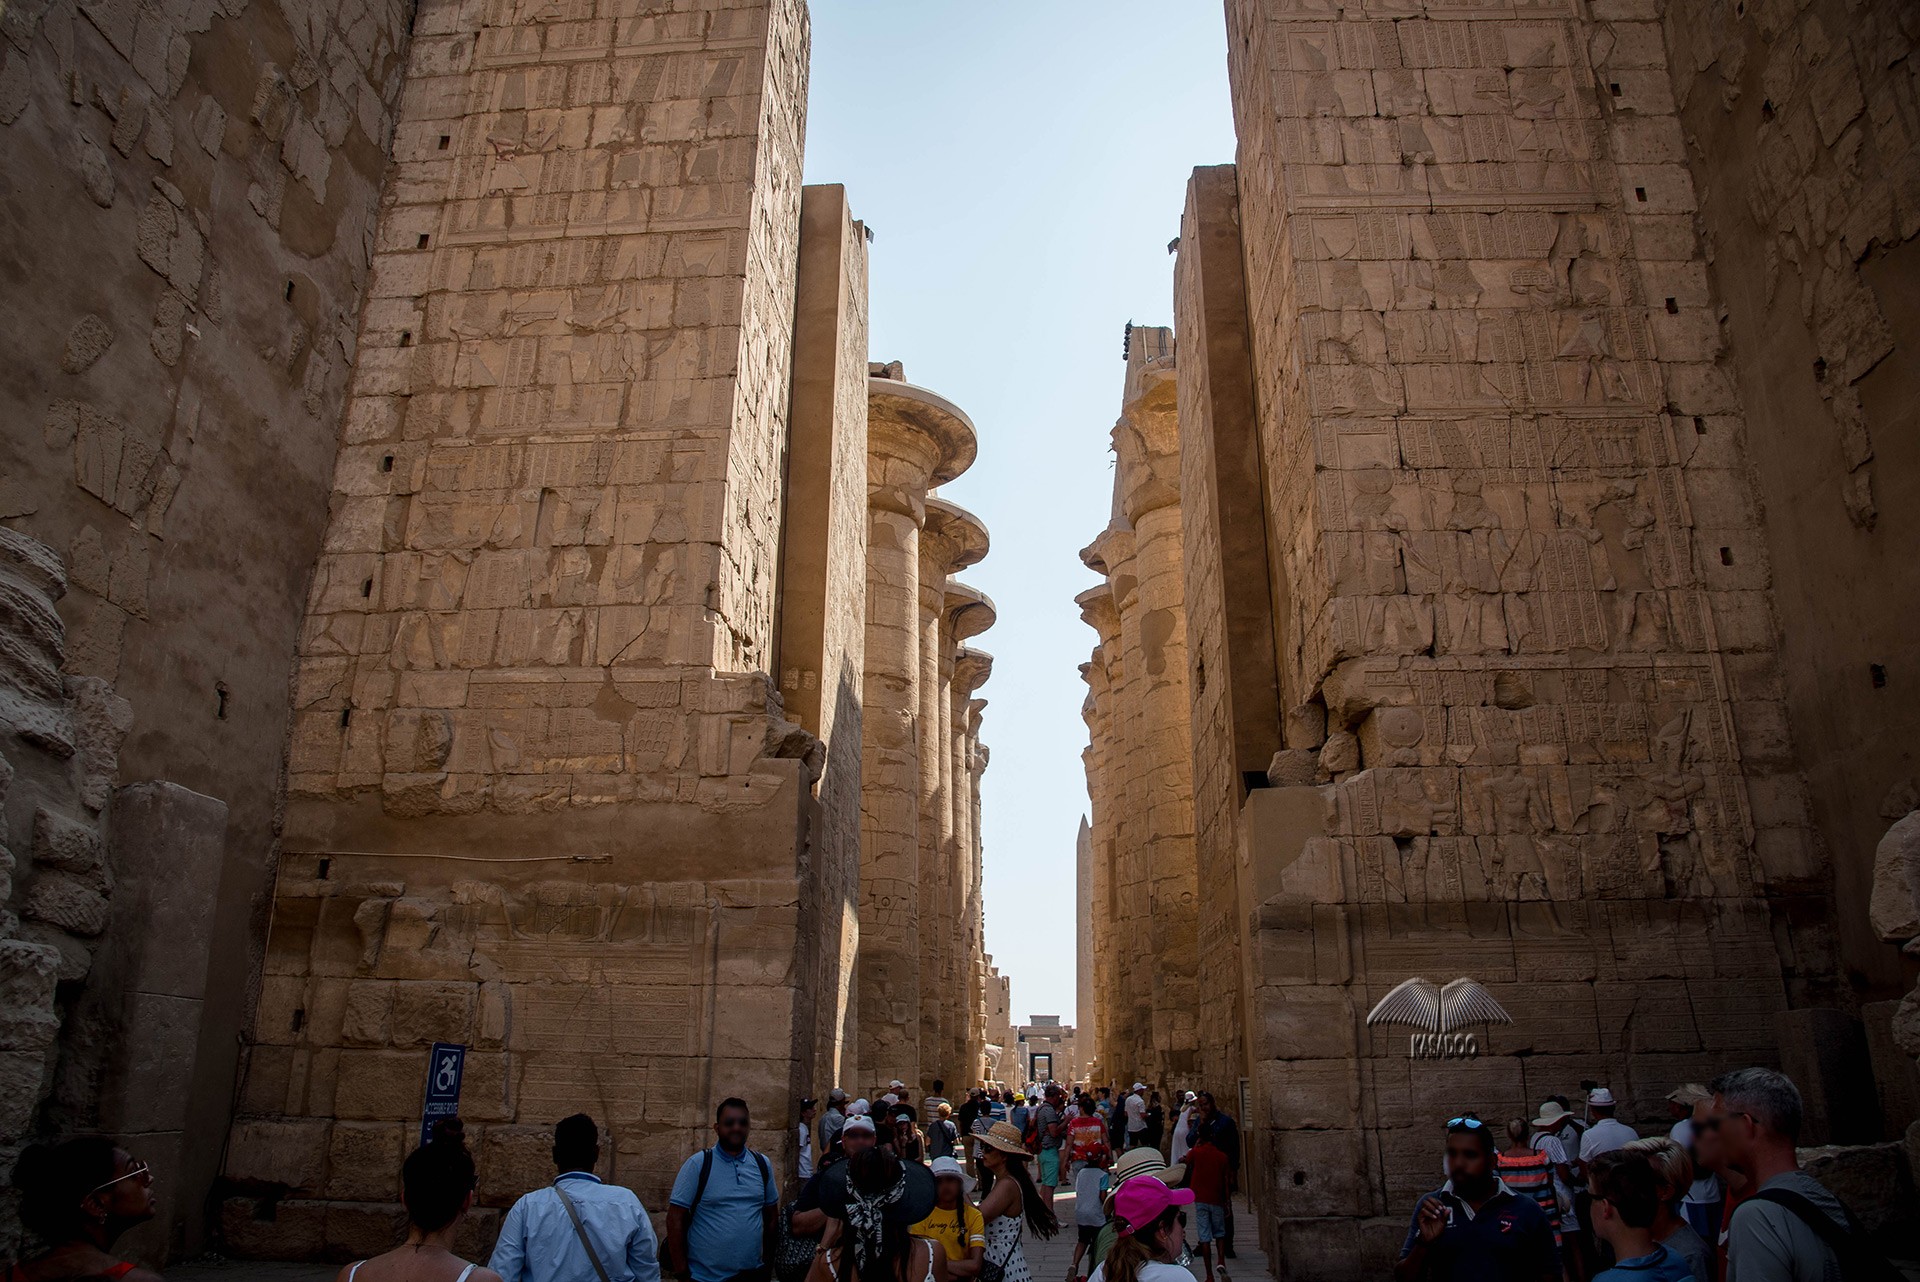 The entrance to the Hypostyle Hall